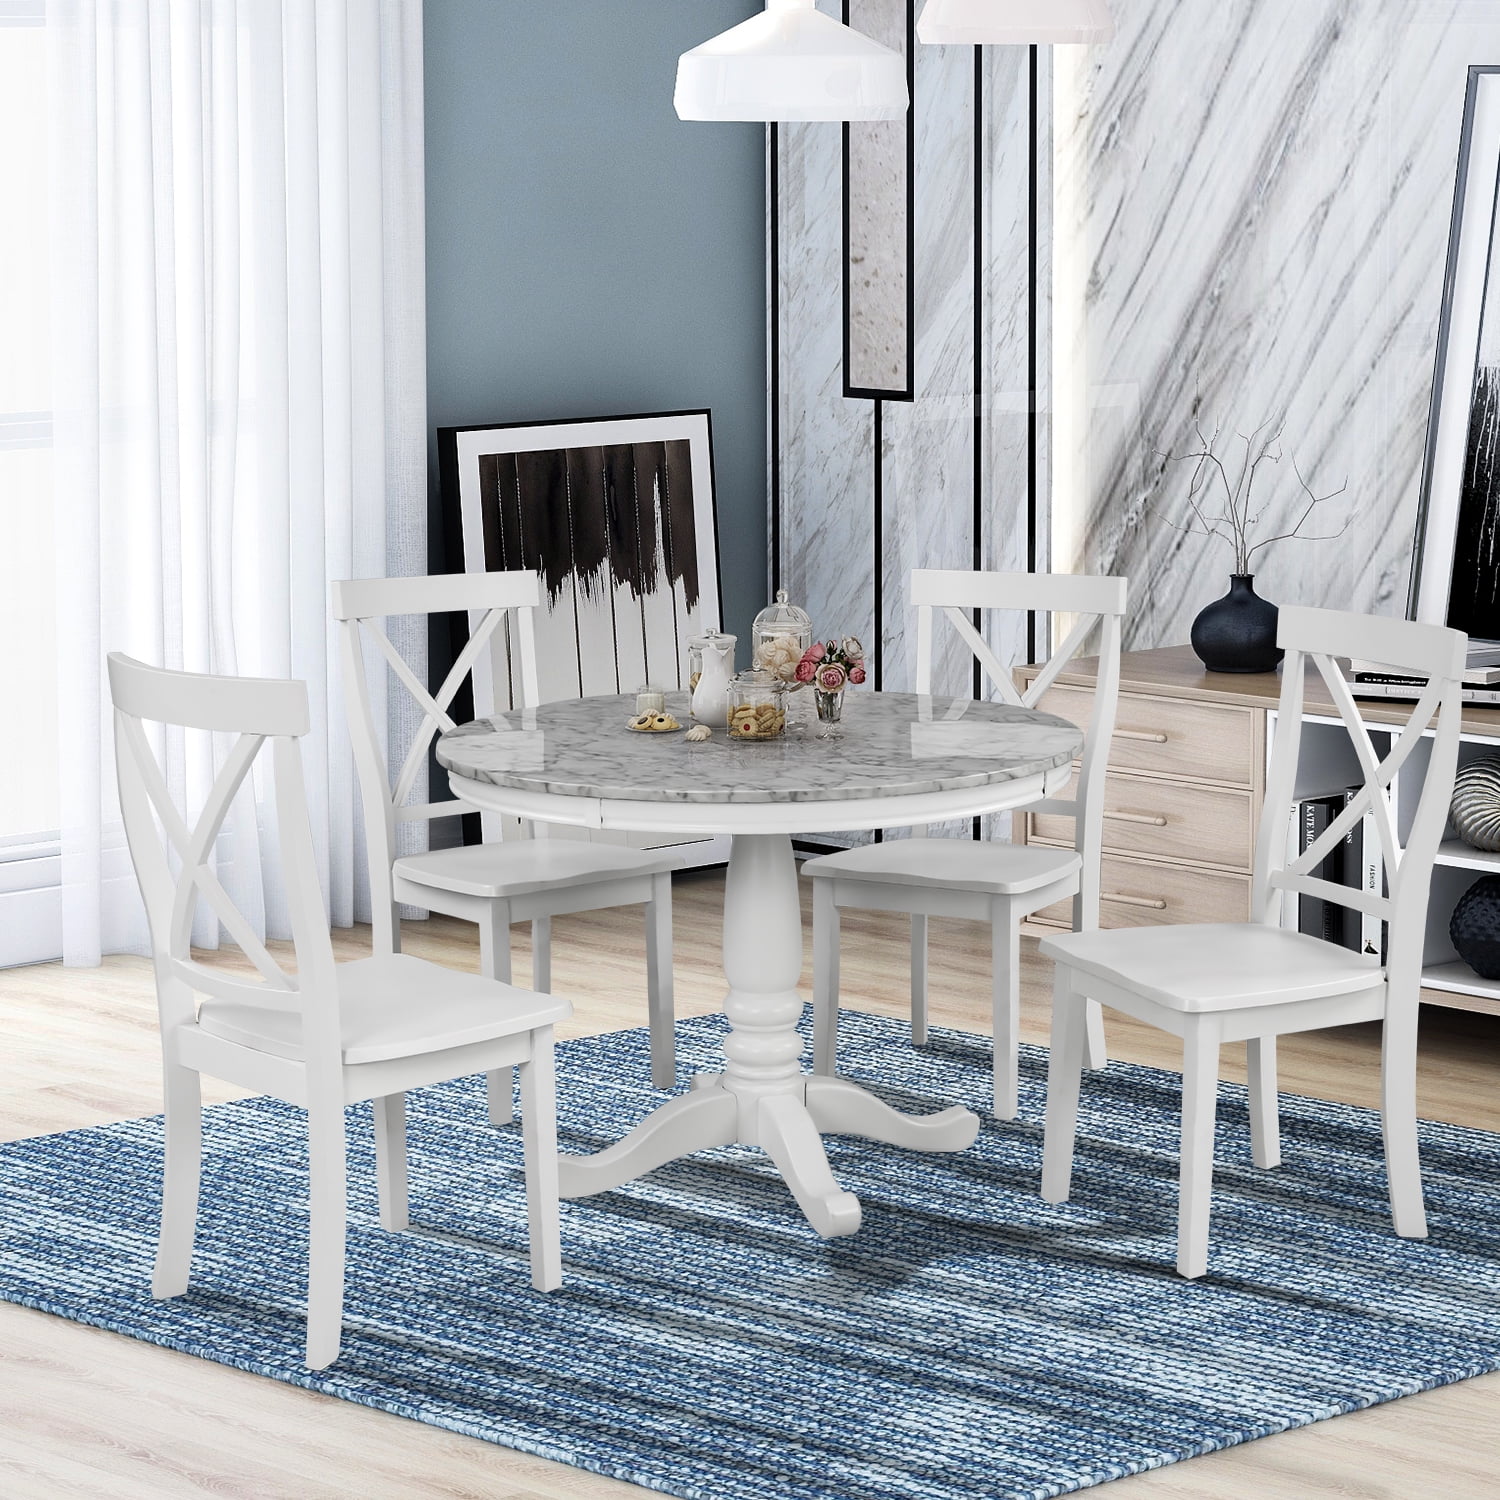 Breakfast Nook Dining Table Chairs Set, Small Dining Room Table And Chairs Set